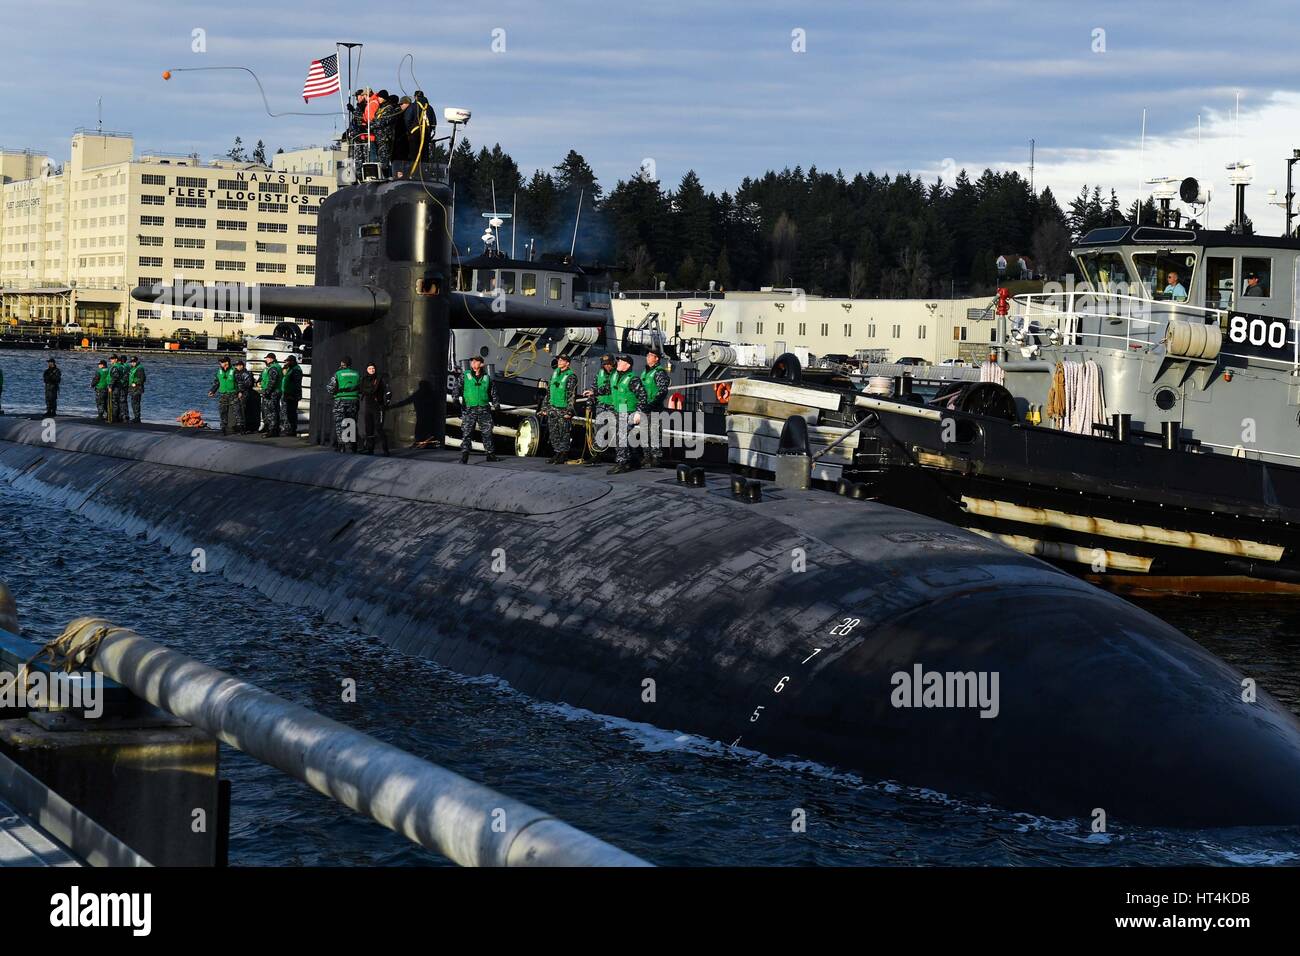 U.S. sailors toss mooring lines off of the USN Los Angeles-class fast-attack submarine USS Olympia as it arrives at the Naval Base Kitsap-Bremerton January 27, 2017 in Bremerton, Washington. Stock Photo